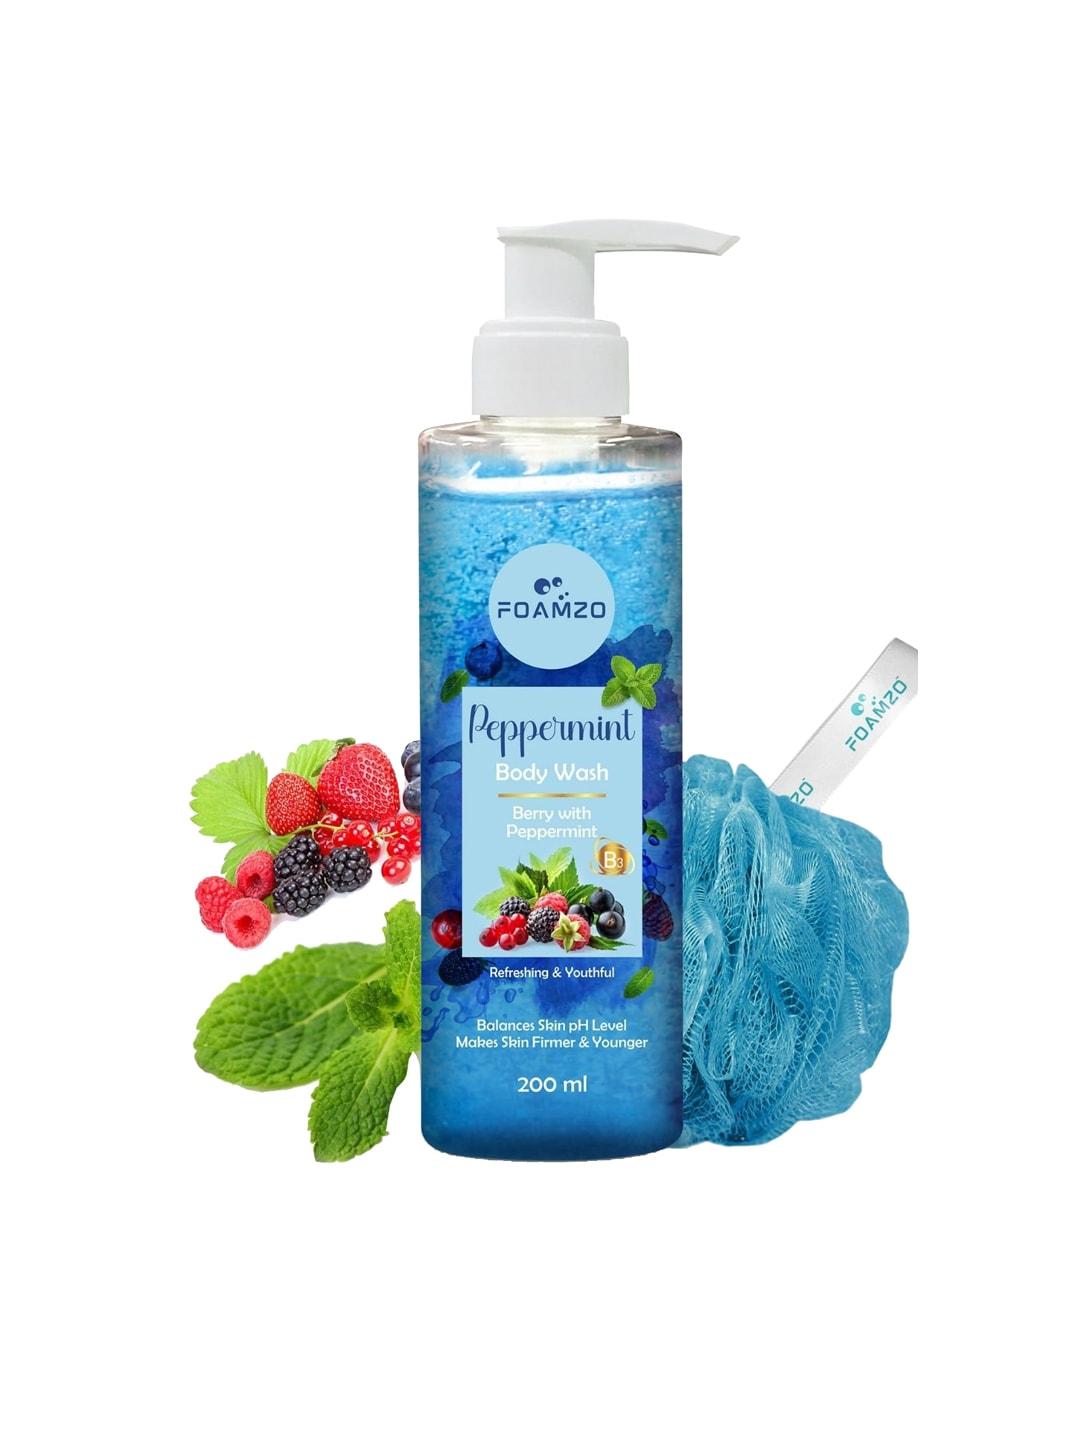 foamzo peppermint body wash with berries extract 200 ml